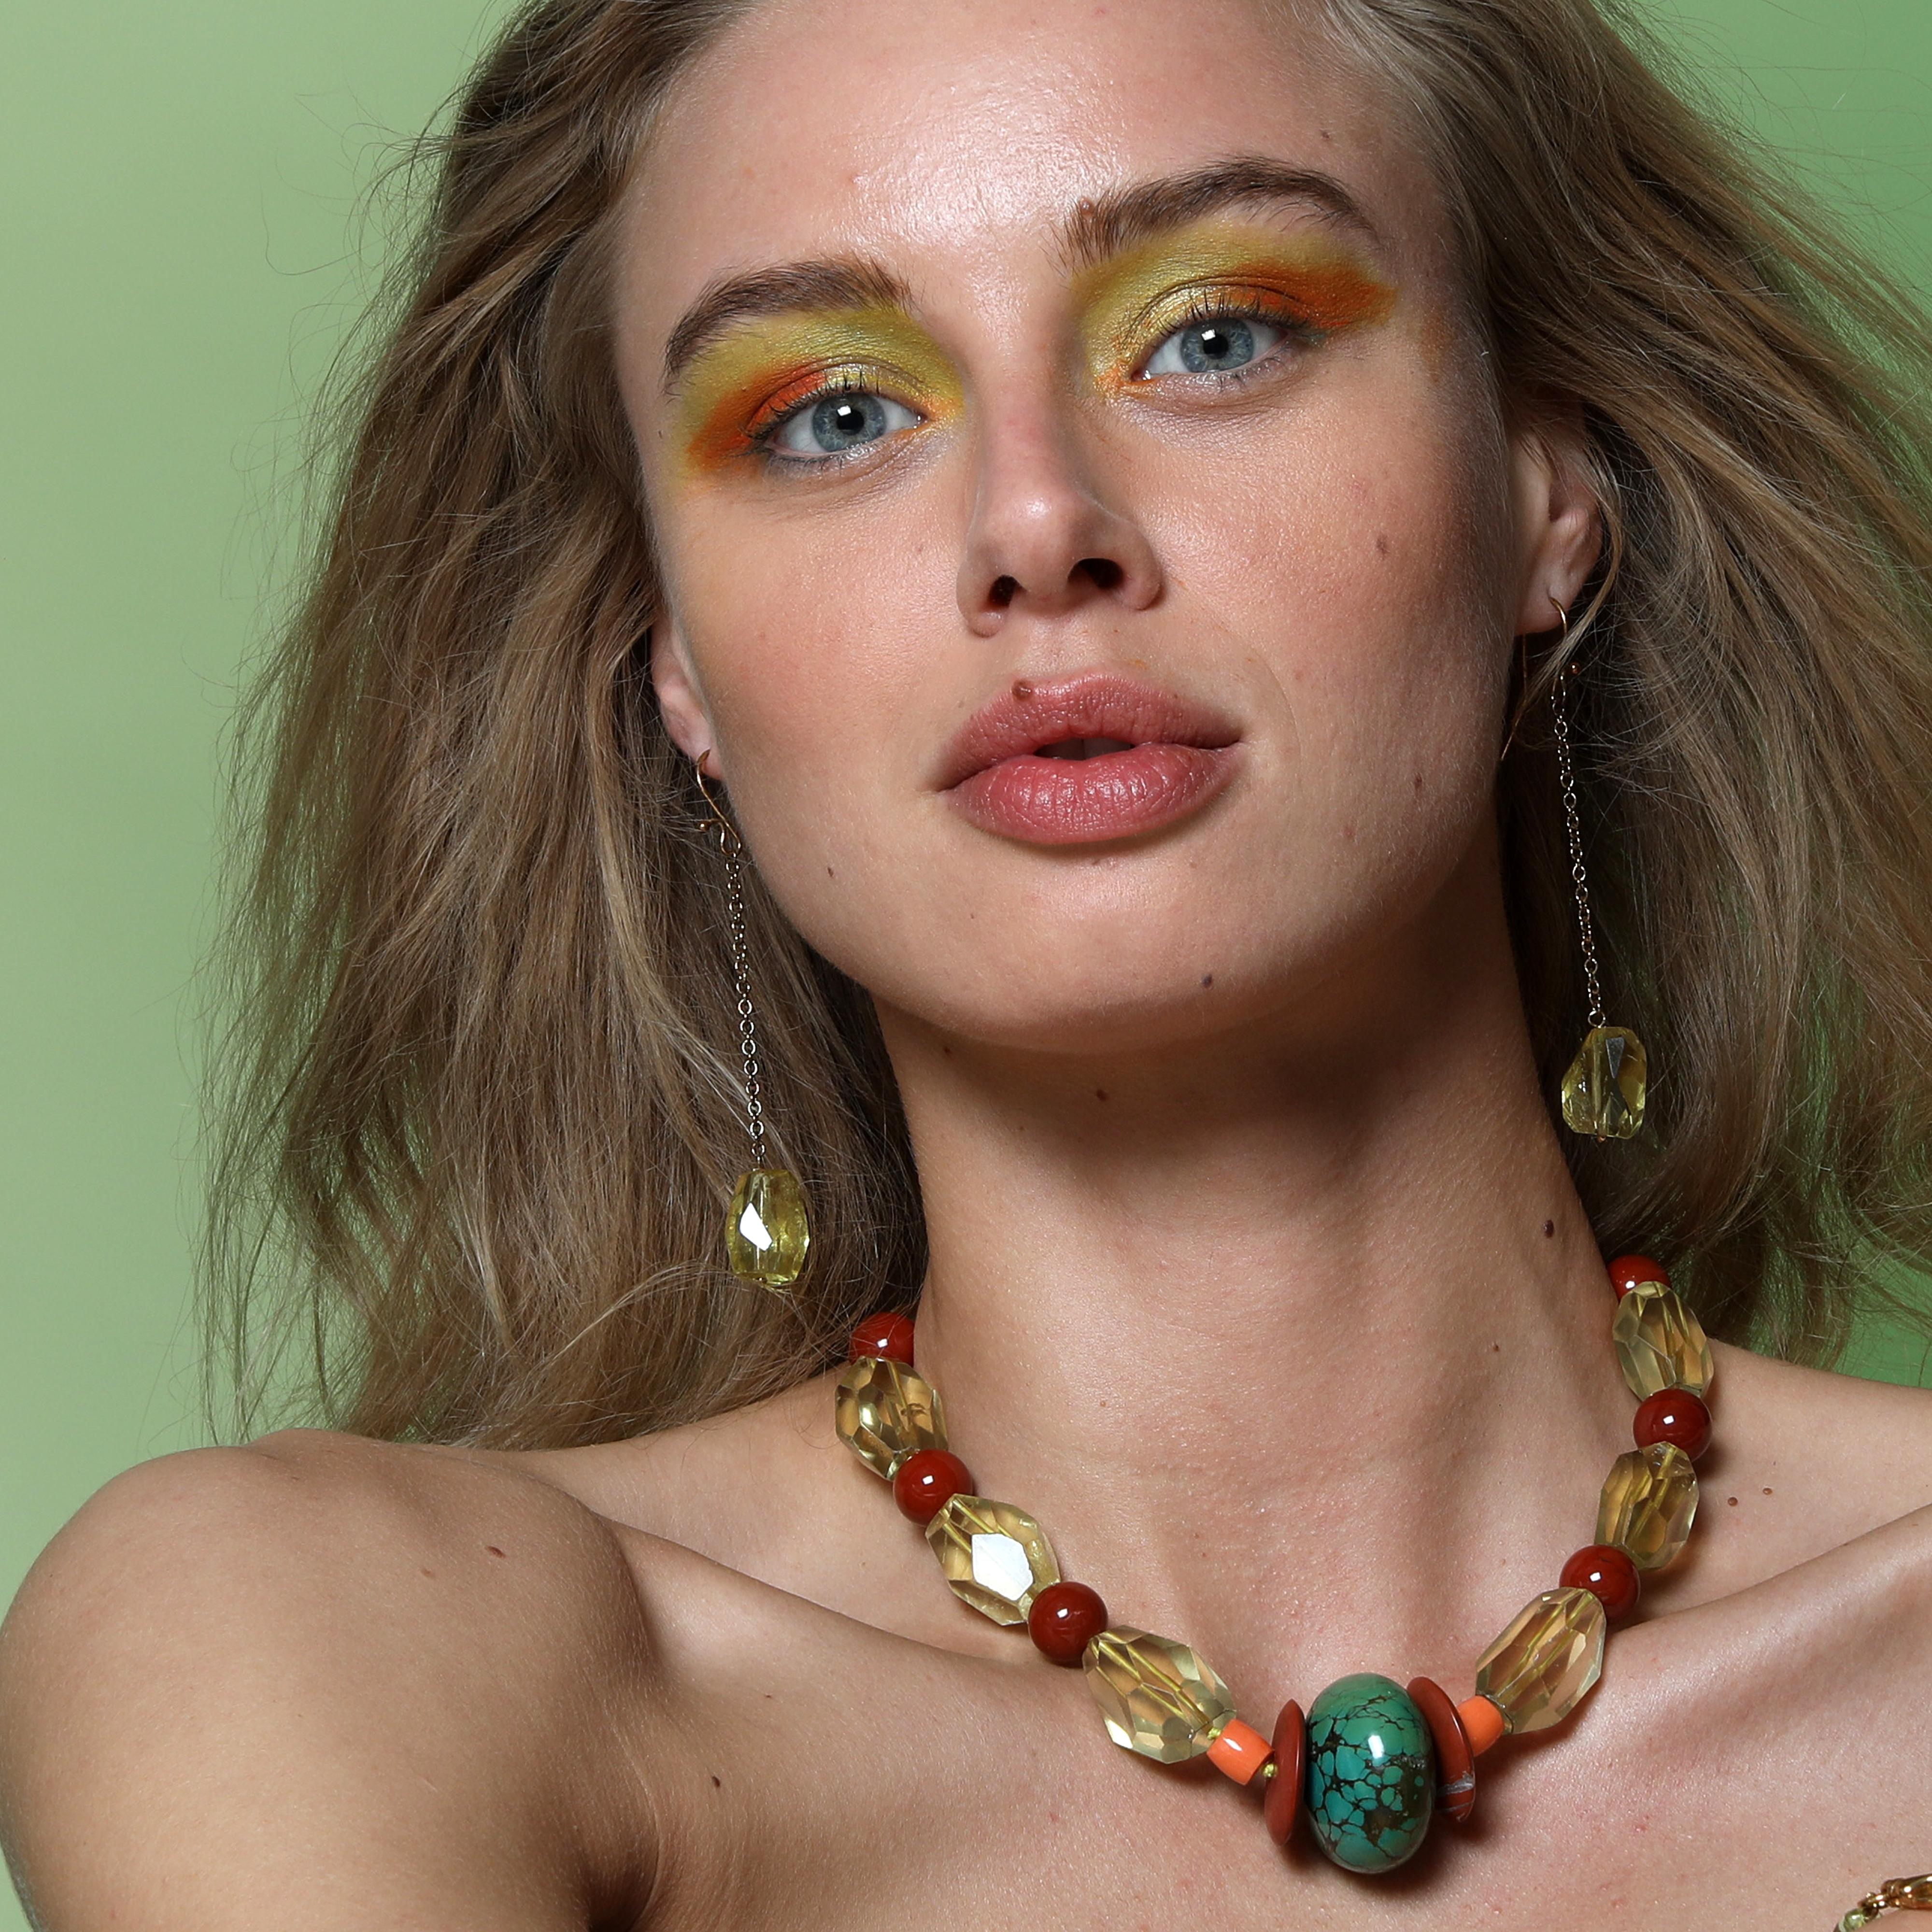 Breathtaking and sumptuous geometric set of necklace and earrings inspired in the gemstones healing powers and the fashion behind them. Stunning masterpiece with a range of diverse gems and colors that rise into fantastic jewels.
 
The citrine